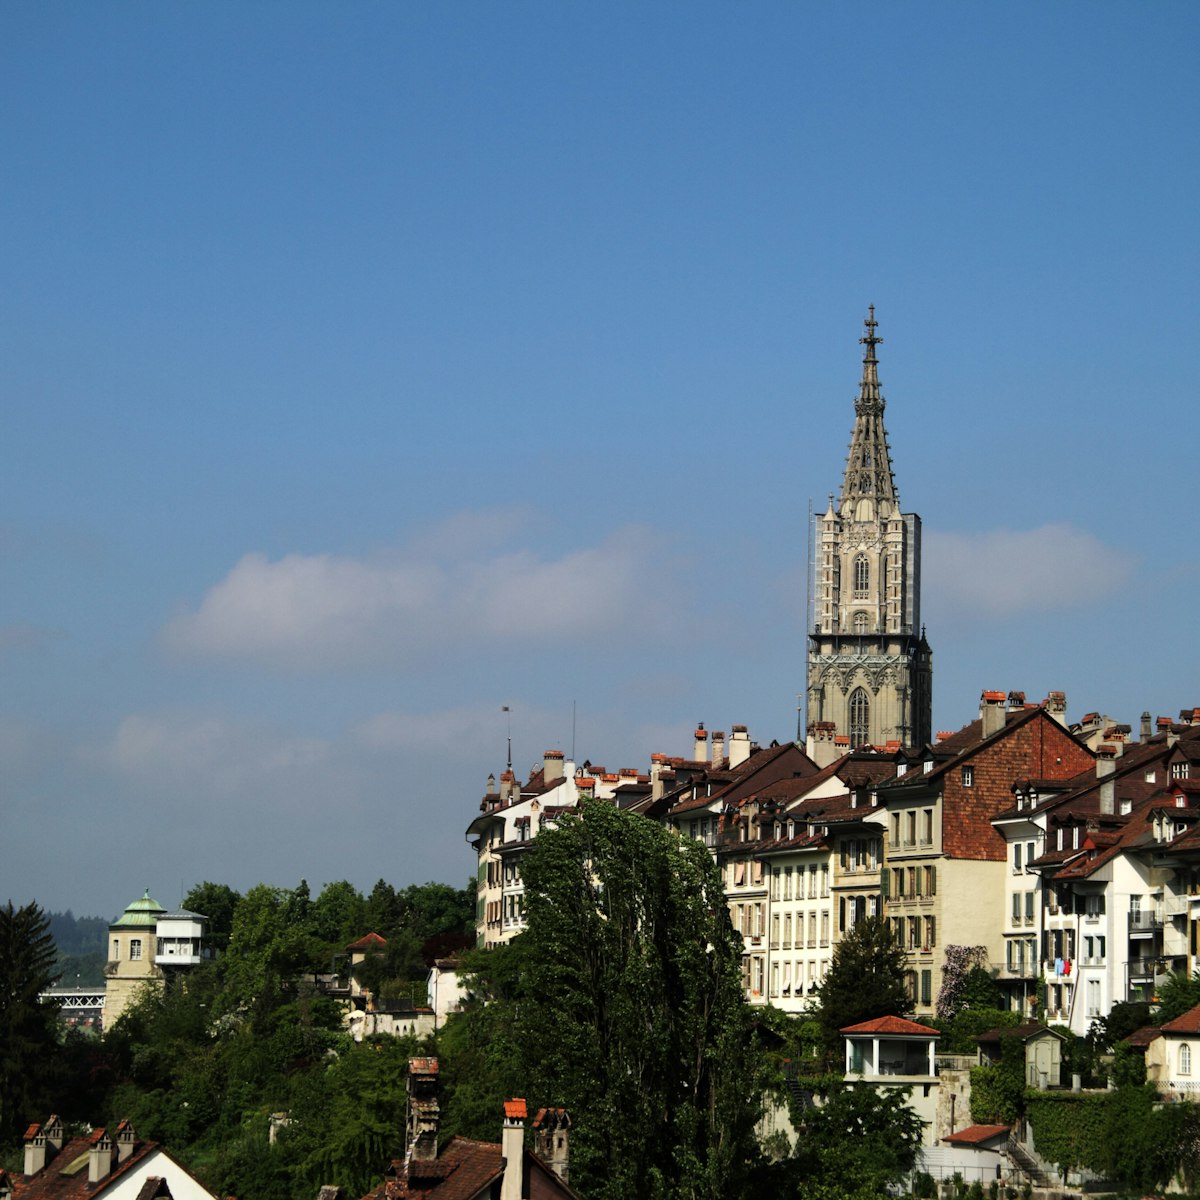 Bern Old Town with Gothic Munster (Cathedral) in background.